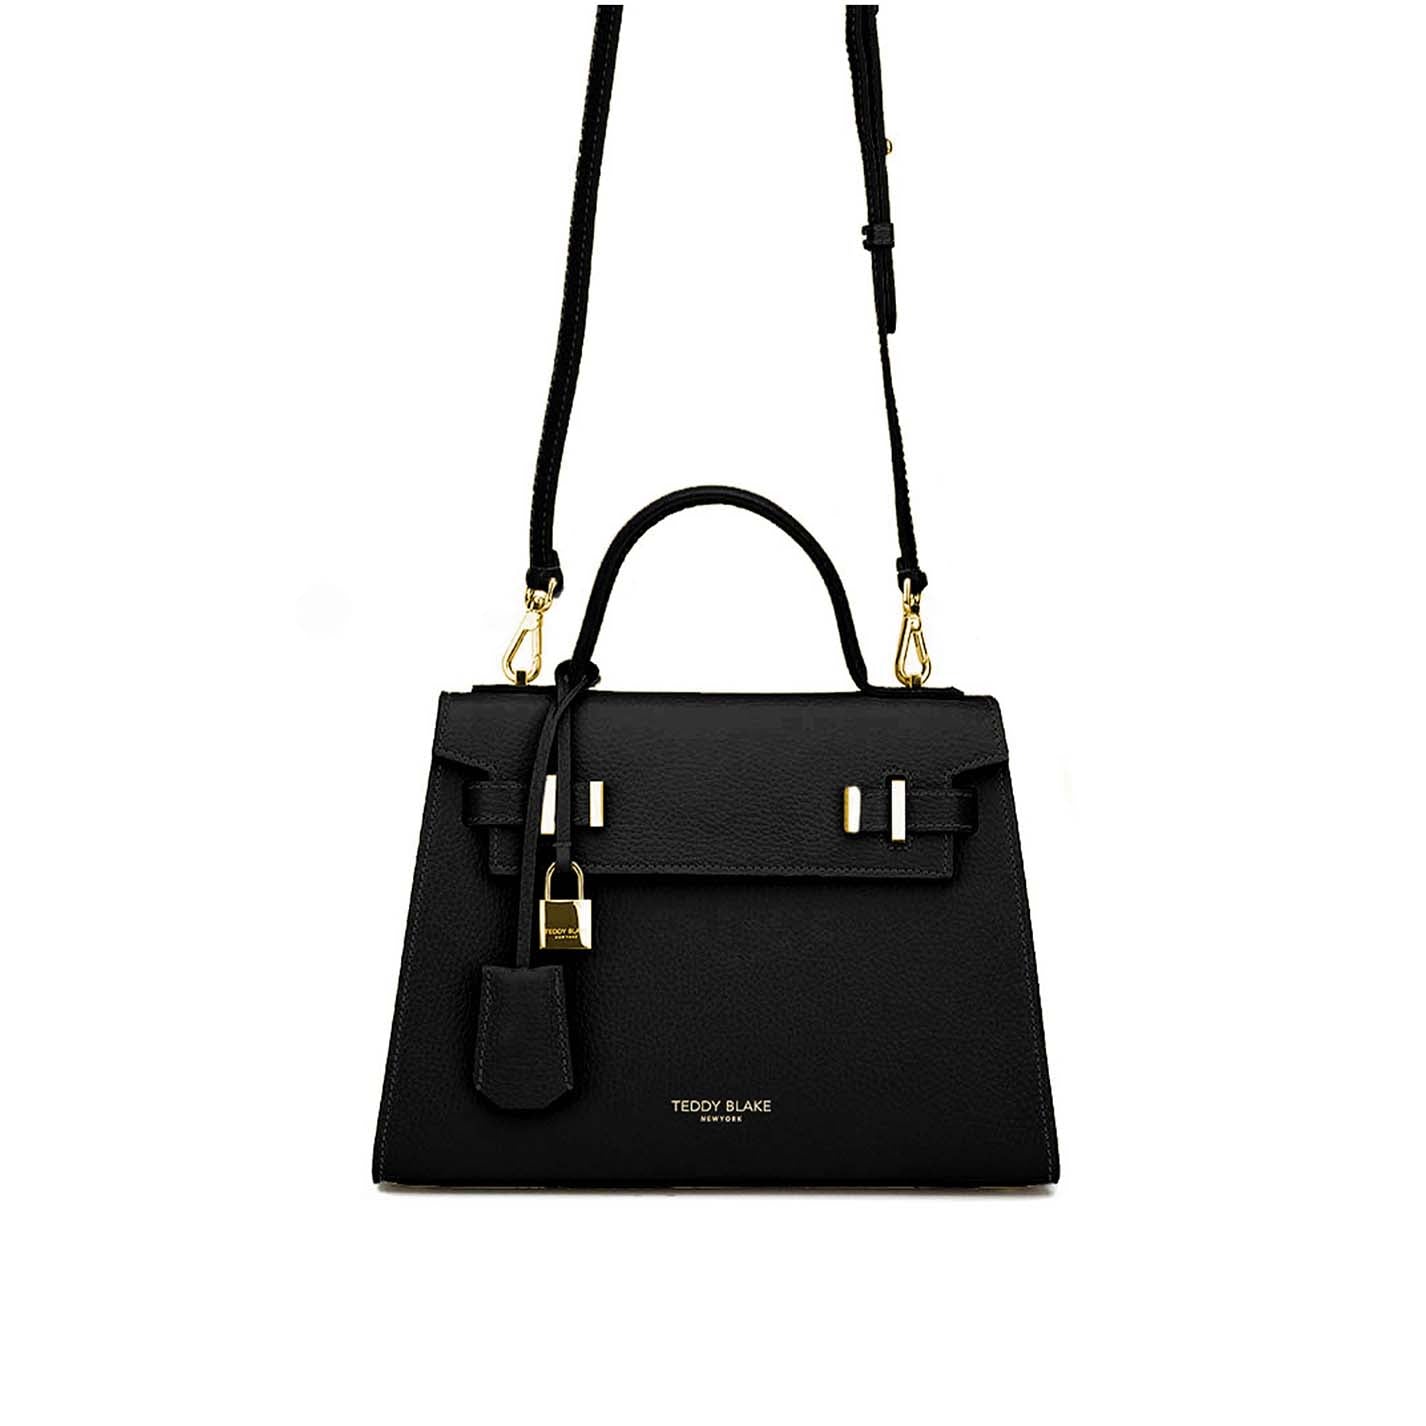 ava-gold-11-black-leather-bag-with-handle